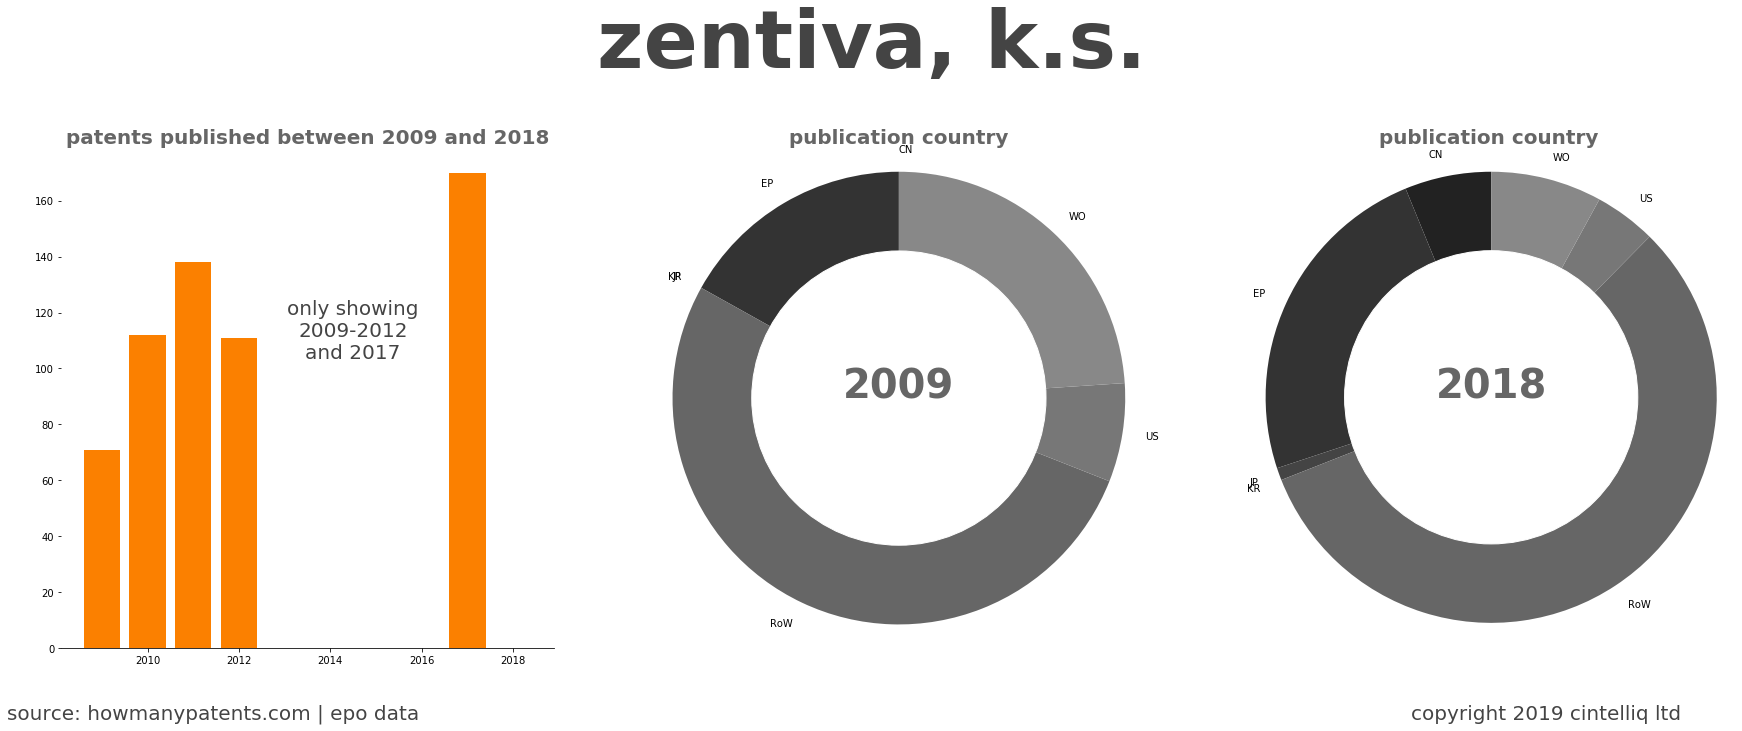 summary of patents for Zentiva, K.S.